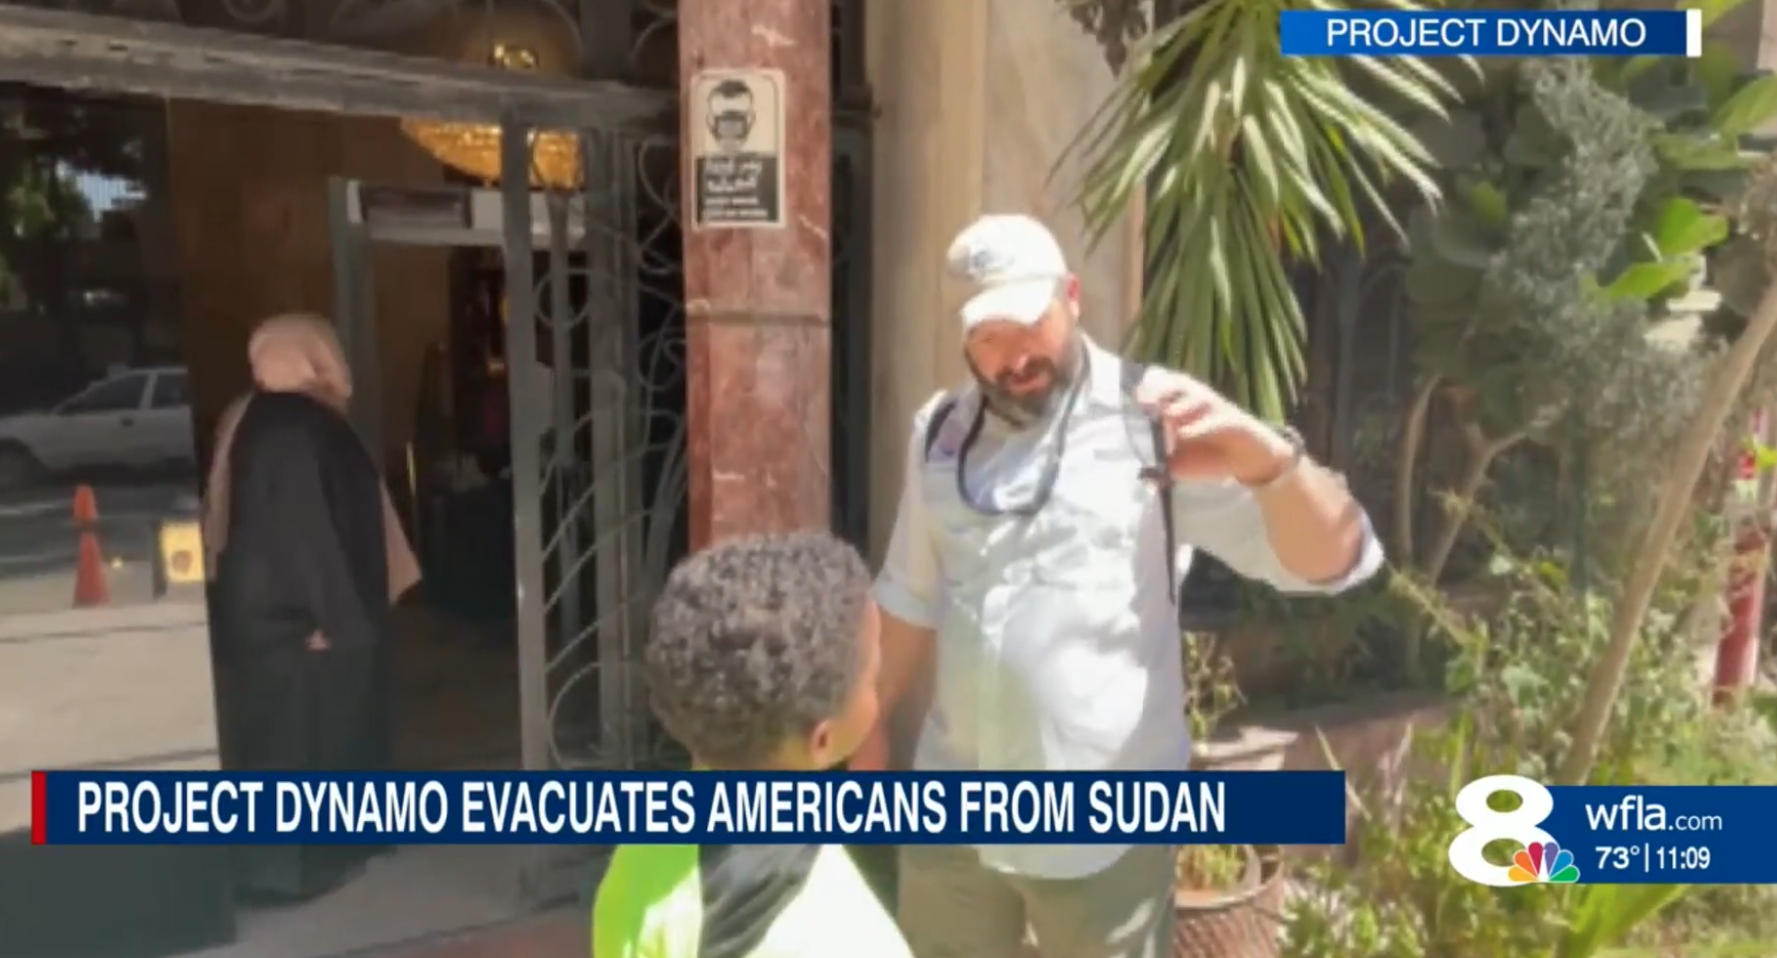 News Channel 8: Tampa-based group evacuates dozens of Americans from Sudan